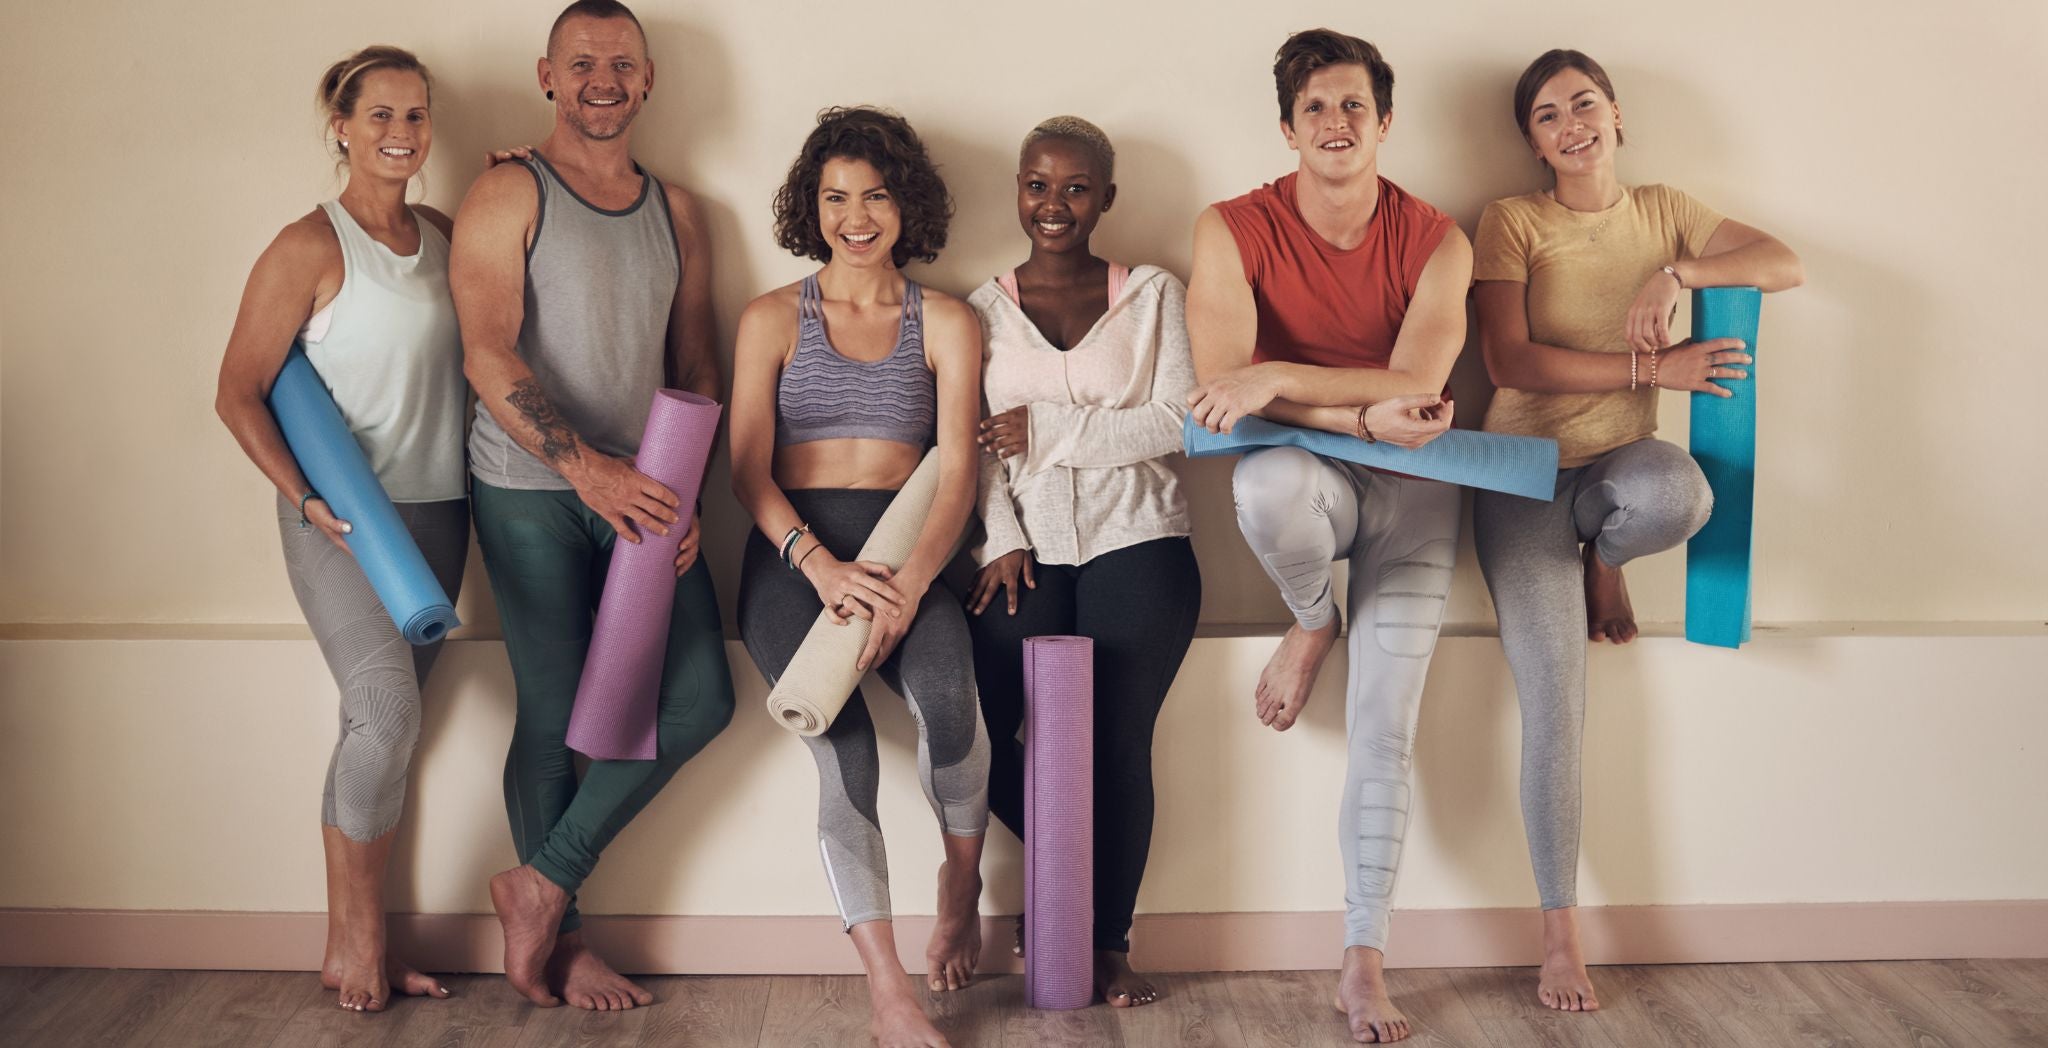 What Should You Wear to a Yoga Class?